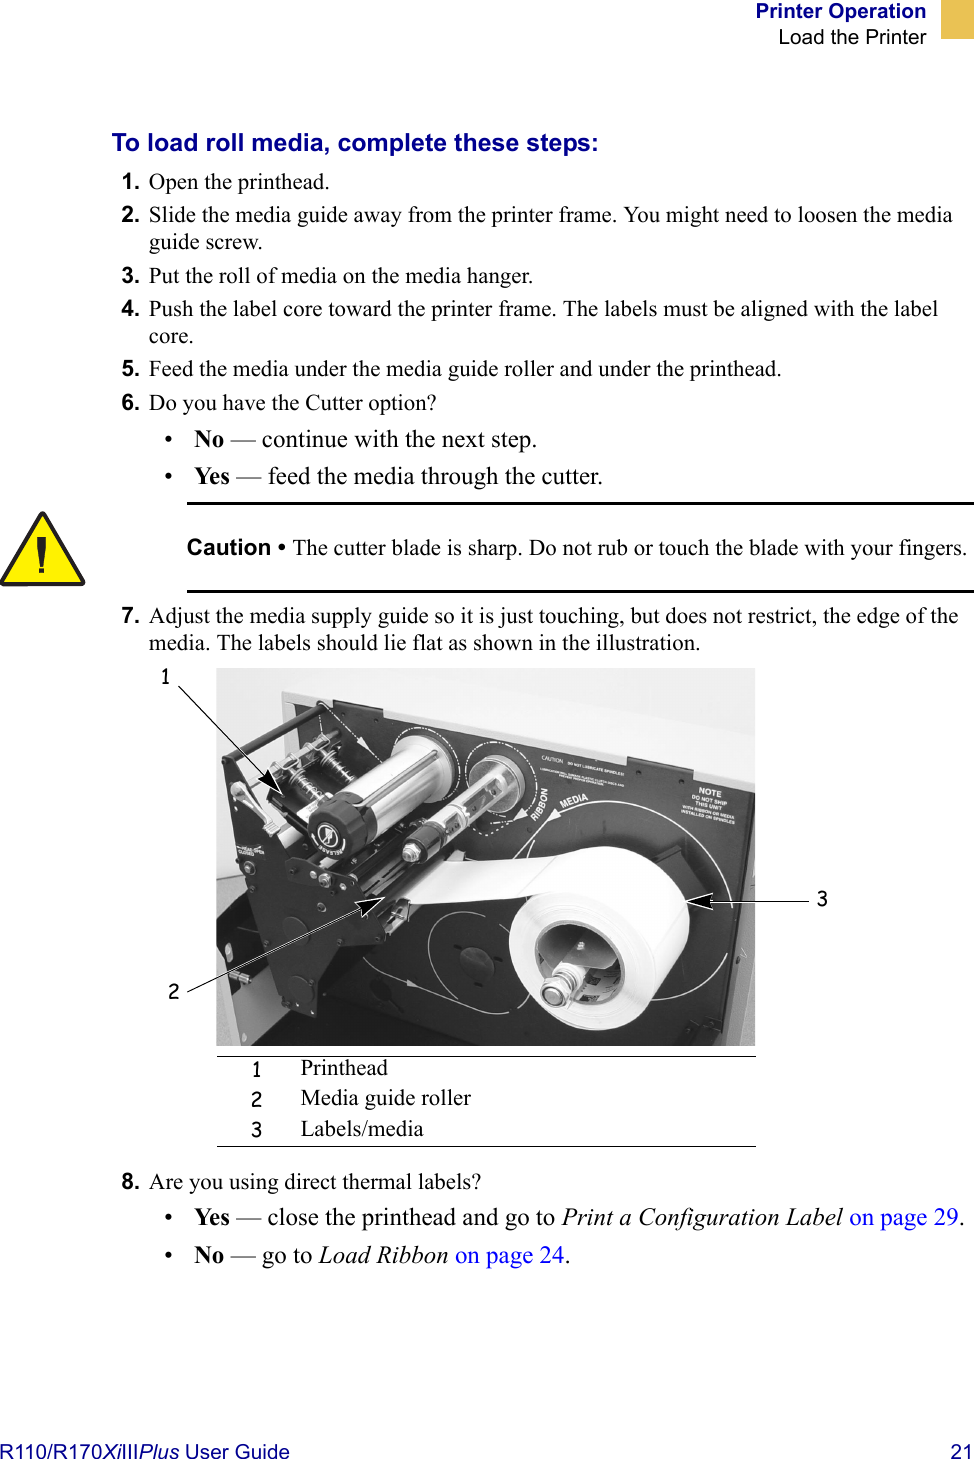 Printer OperationLoad the PrinterR110/R170XiIIIPlus User Guide  21To load roll media, complete these steps:1. Open the printhead.2. Slide the media guide away from the printer frame. You might need to loosen the media guide screw.3. Put the roll of media on the media hanger.4. Push the label core toward the printer frame. The labels must be aligned with the label core. 5. Feed the media under the media guide roller and under the printhead.6. Do you have the Cutter option?•No — continue with the next step.•Ye s  — feed the media through the cutter.7. Adjust the media supply guide so it is just touching, but does not restrict, the edge of the media. The labels should lie flat as shown in the illustration.8. Are you using direct thermal labels?•Ye s  — close the printhead and go to Print a Configuration Label on page 29.•No — go to Load Ribbon on page 24.Caution • The cutter blade is sharp. Do not rub or touch the blade with your fingers.1Printhead2Media guide roller3Labels/media123